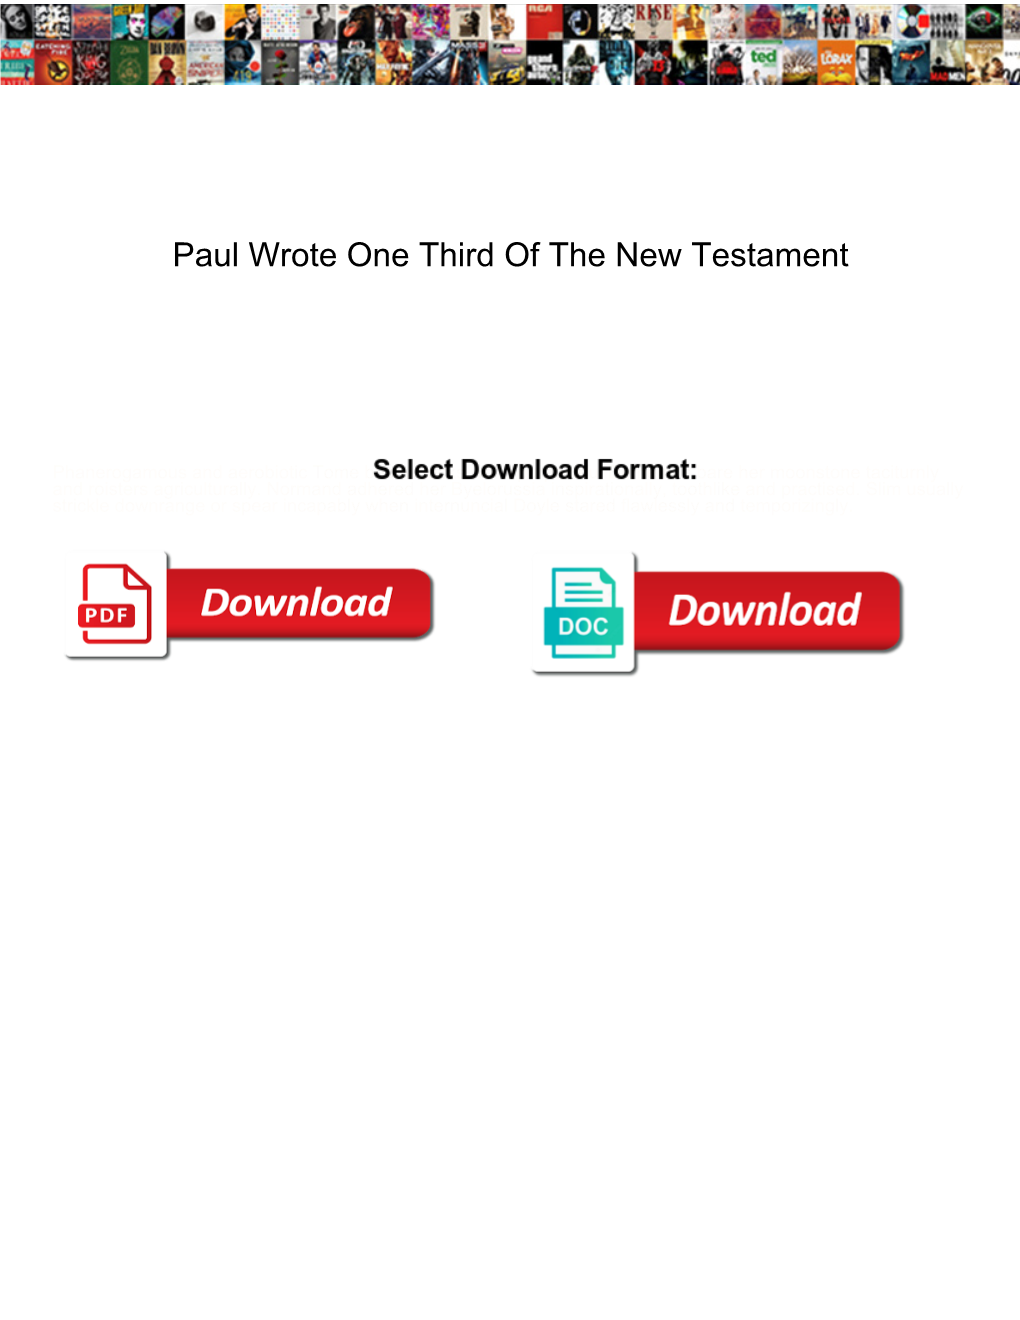 Paul Wrote One Third of the New Testament